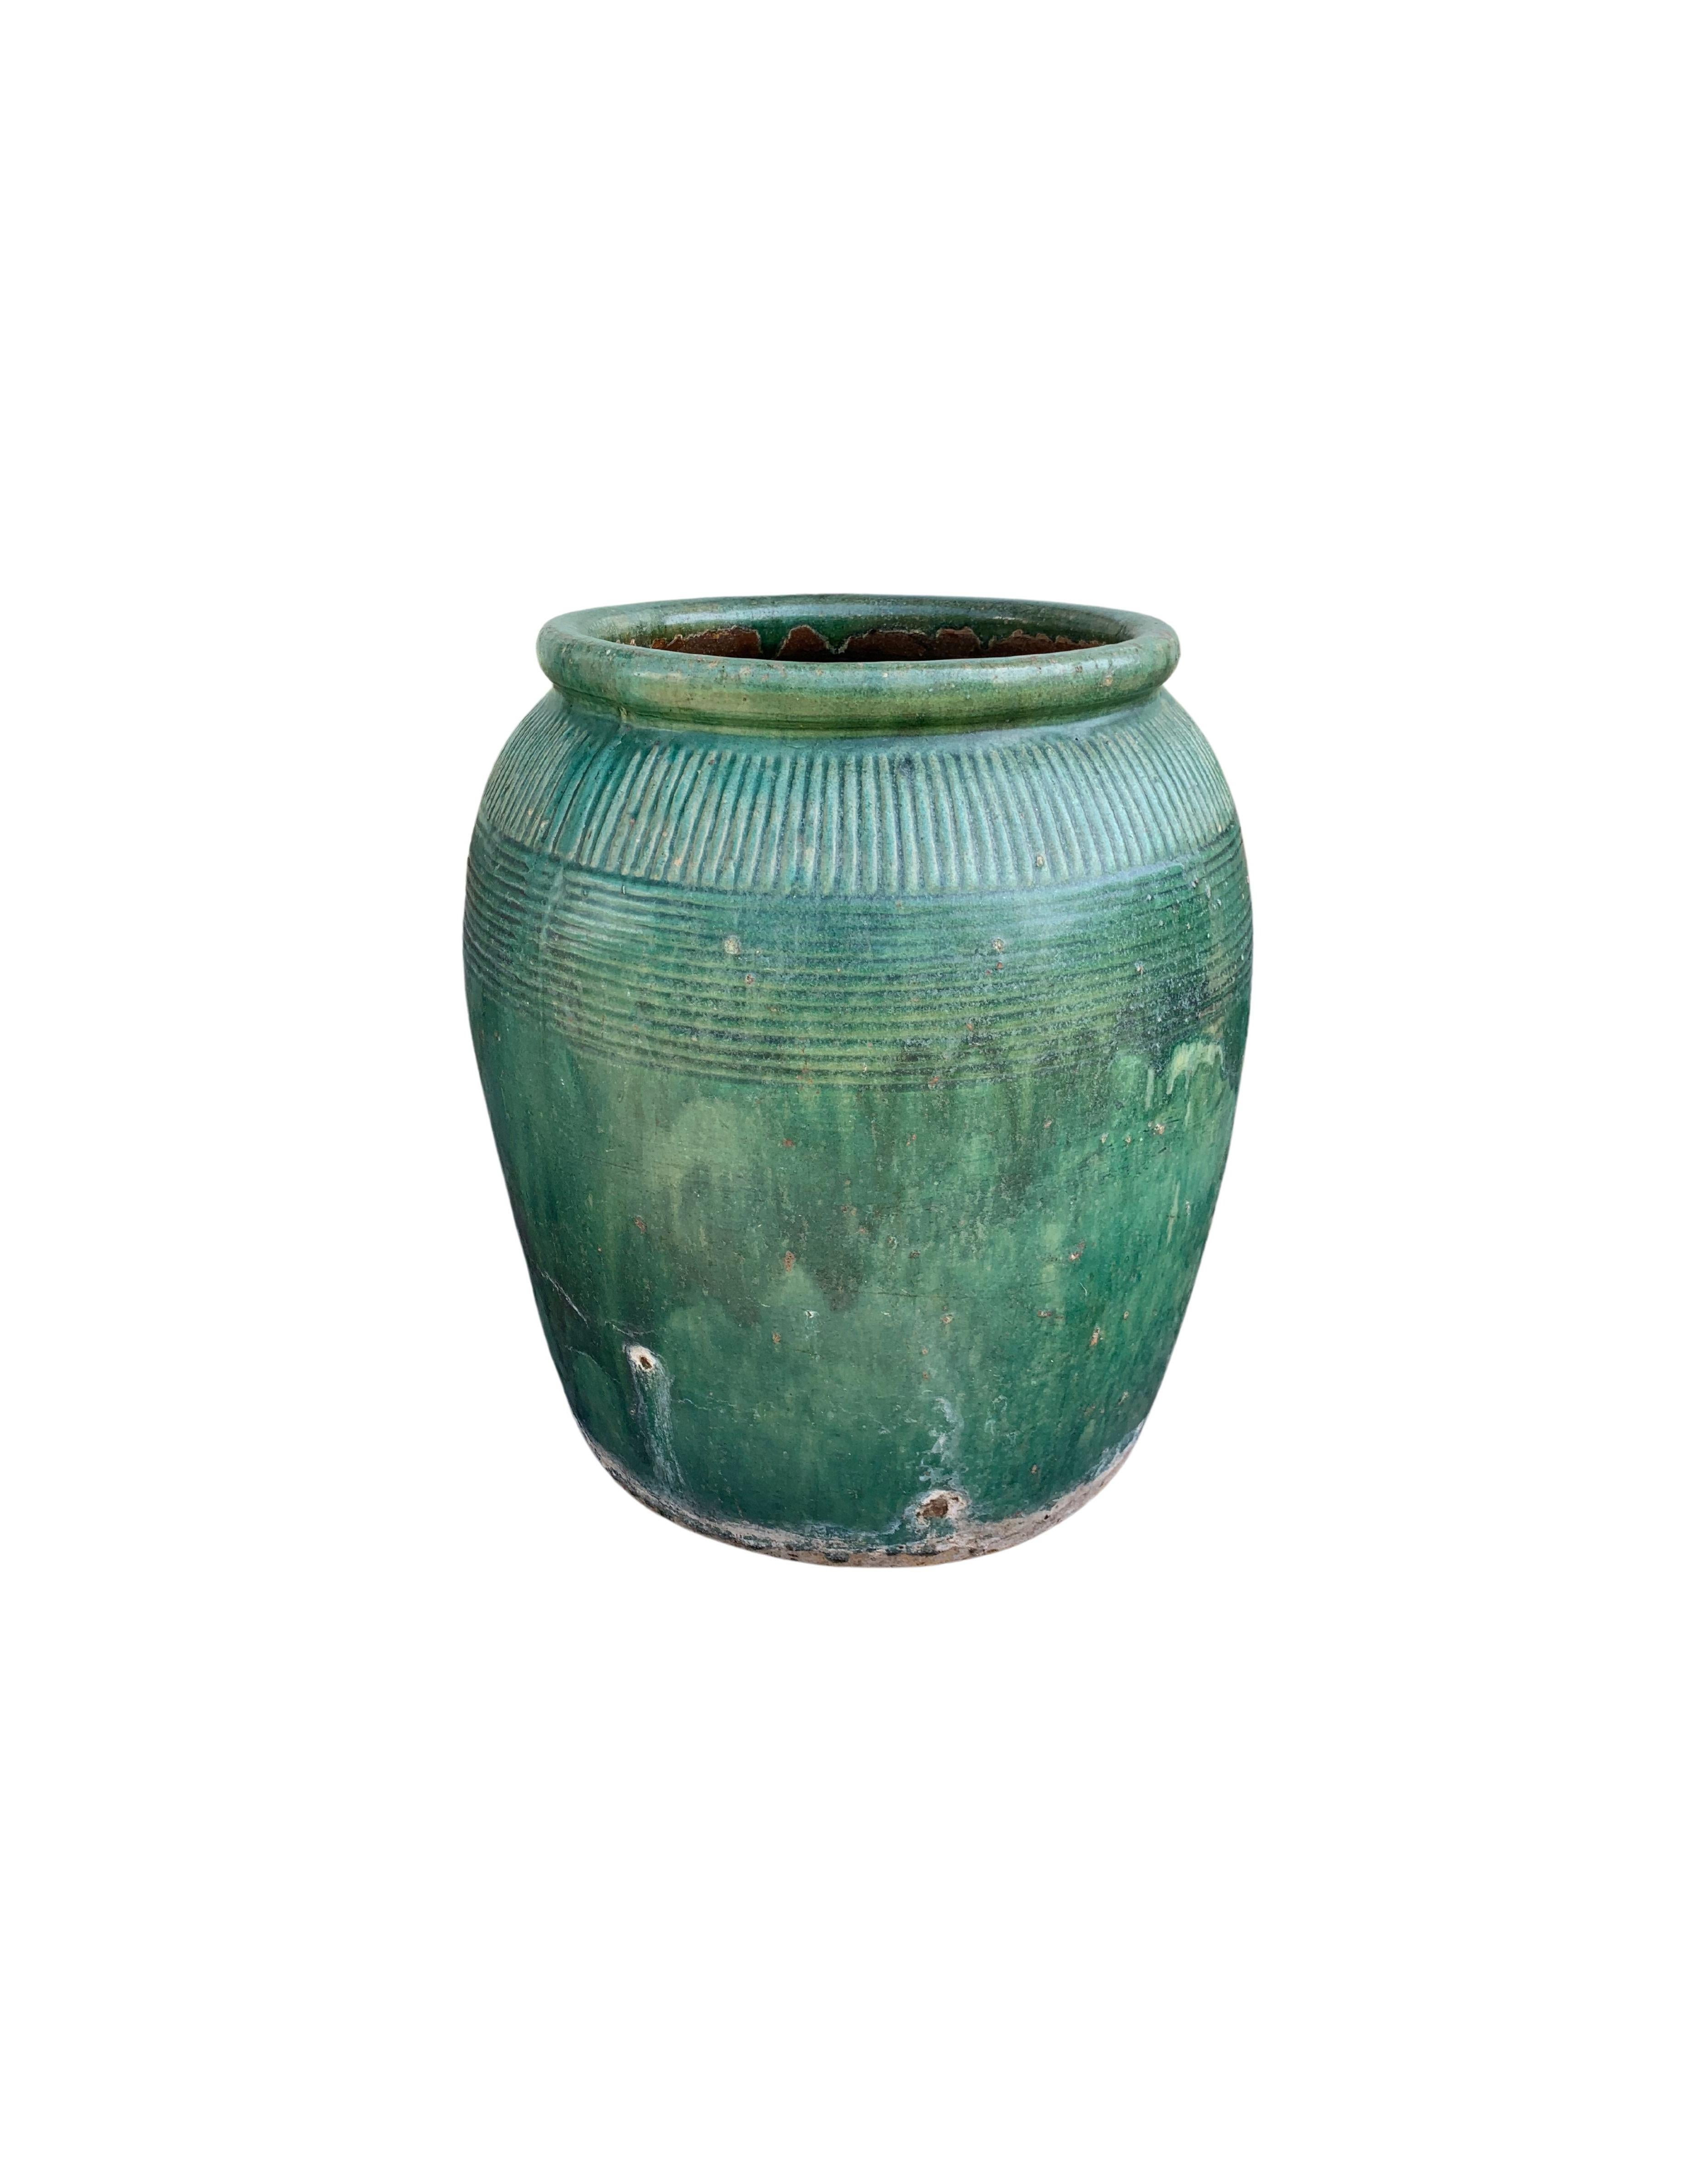 This glazed Chinese ceramic jar from the turn of the 19th Century was once used for soy sauce production. It features a wonderful green glazed finish and outer surface that features a ribbed texture. A great example of Chinese pottery, with its